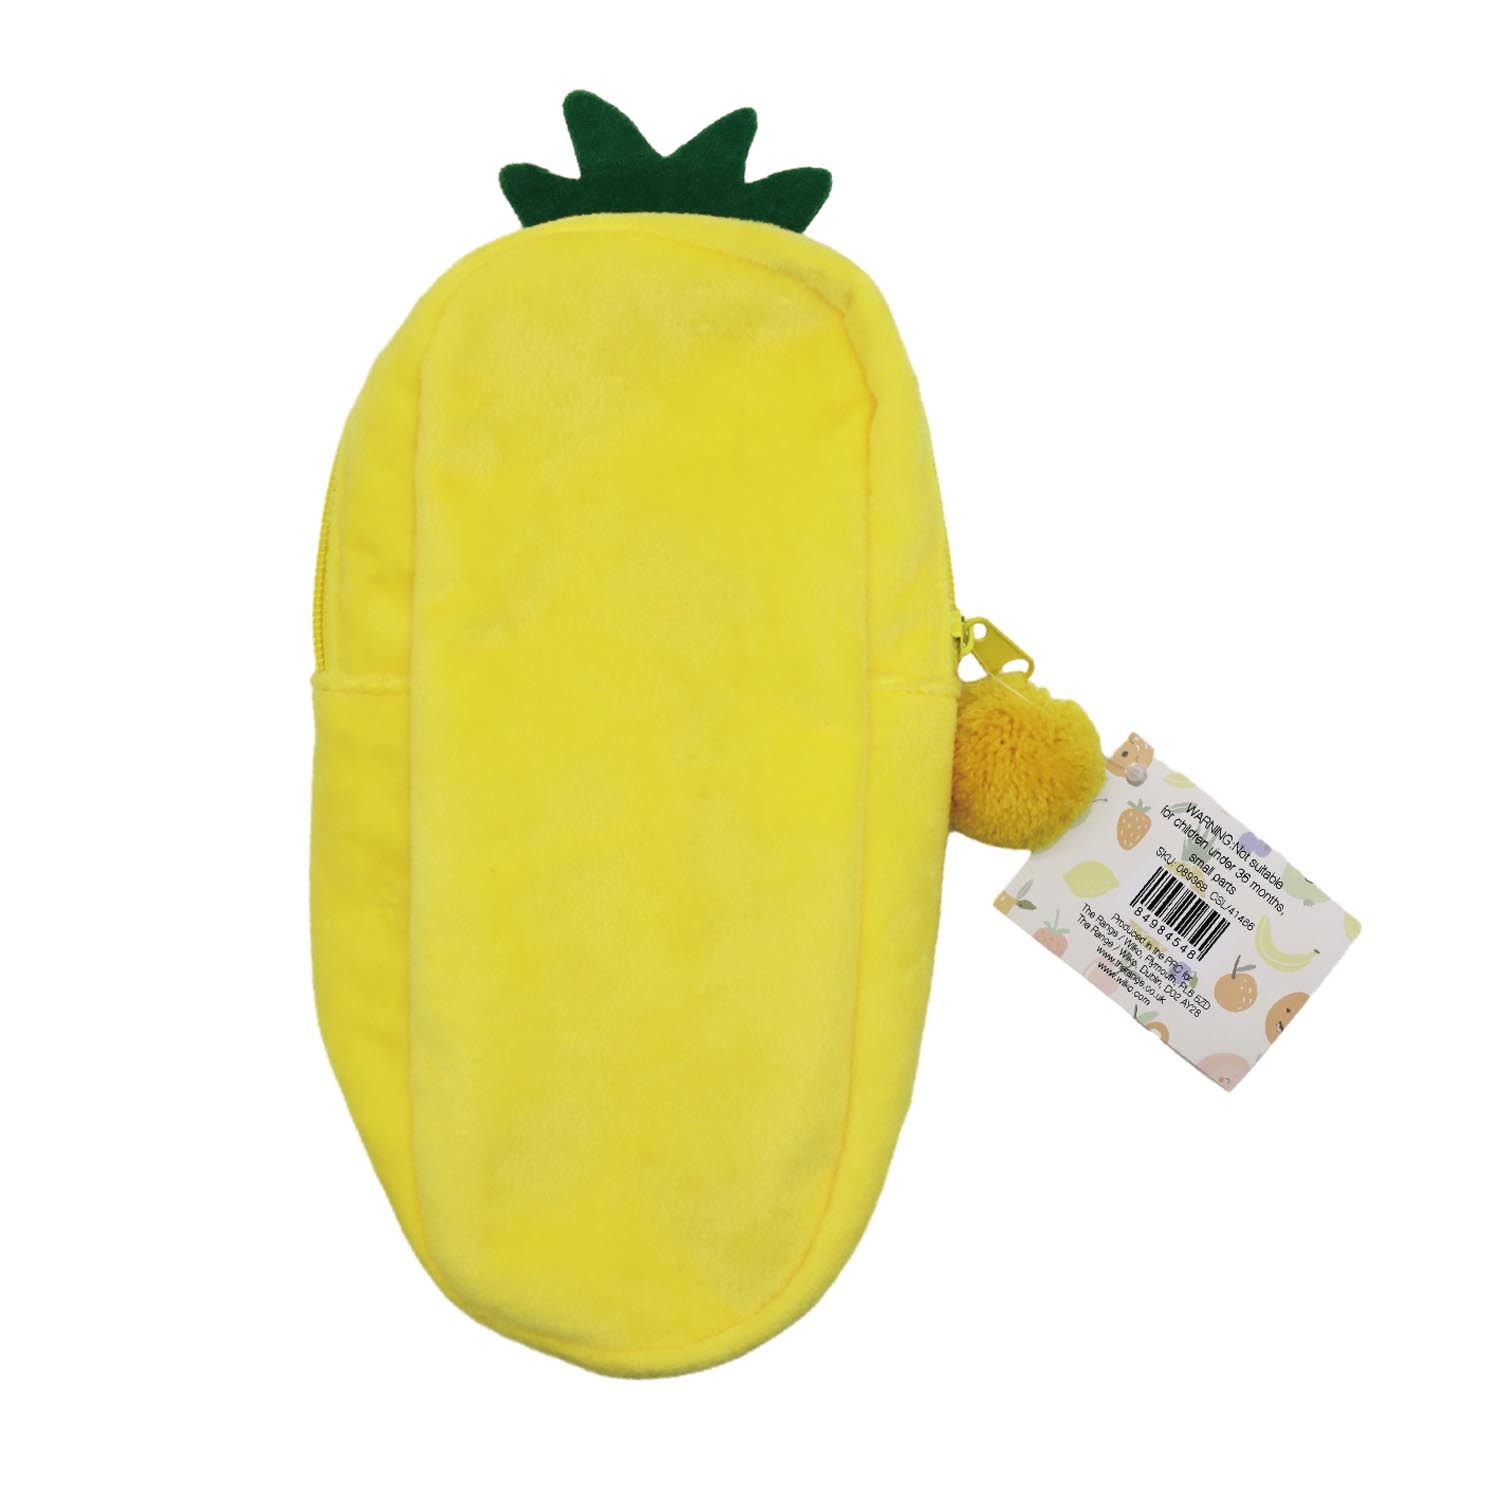 Summer Fruits Pencil Case - Yellow Image 2